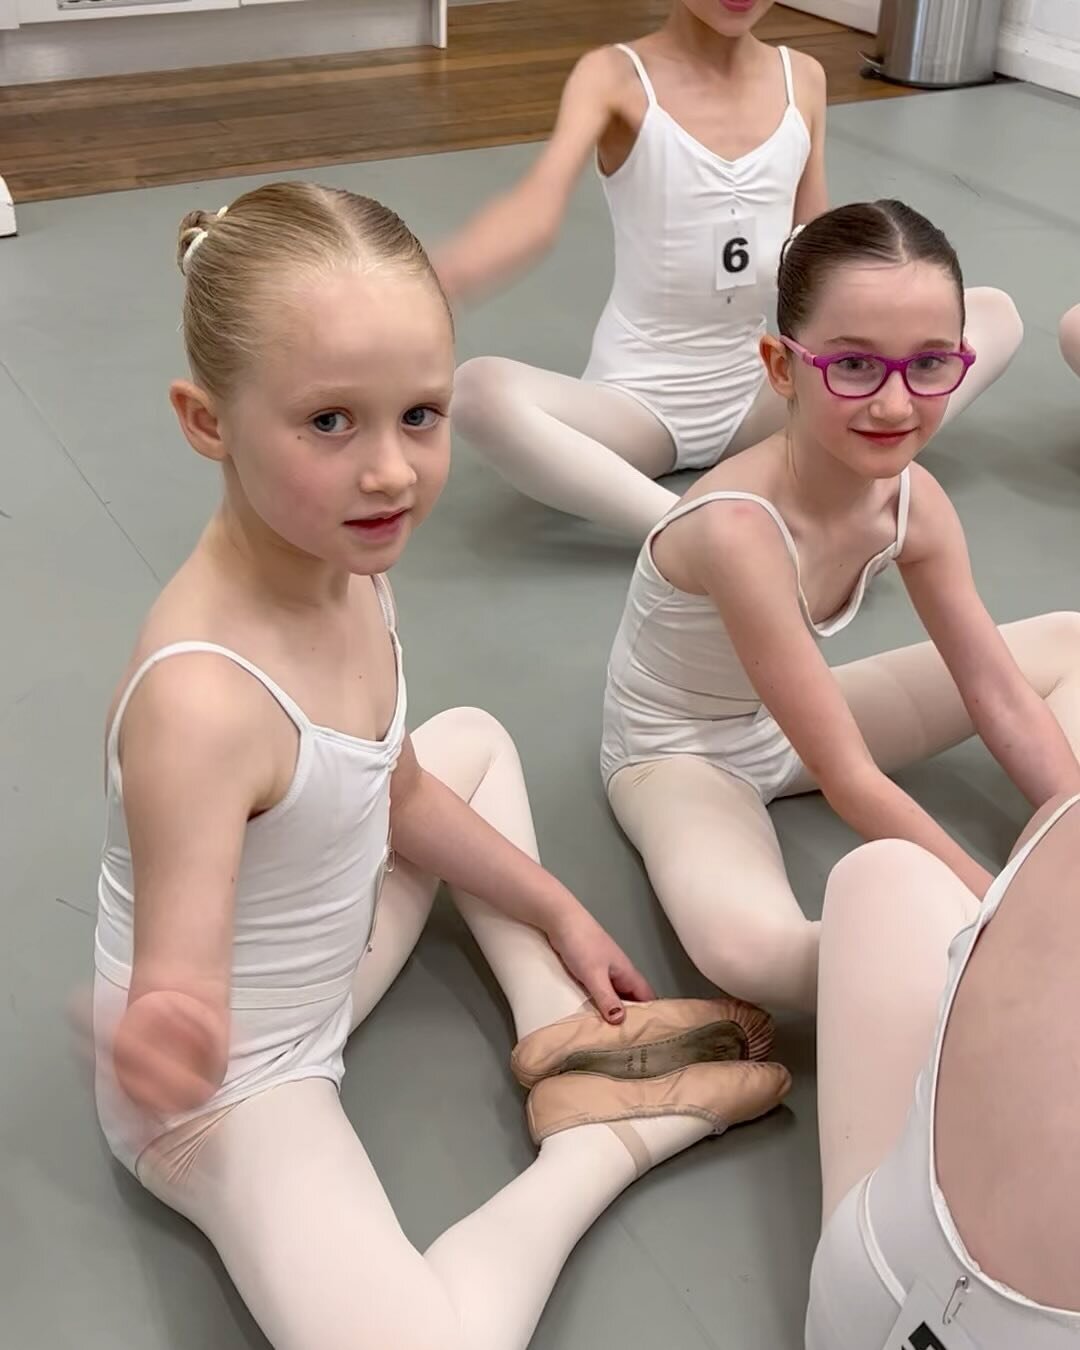 Well done today Grade 1 and Grade 2 ballet students on completion of our Royal Academy of Dance class awards! 💗

We enjoyed our visit to the RAD this morning and had a wonderful time #royalacademyofdance #rad #radexam #cda #grade1 #grade2  #ballet #